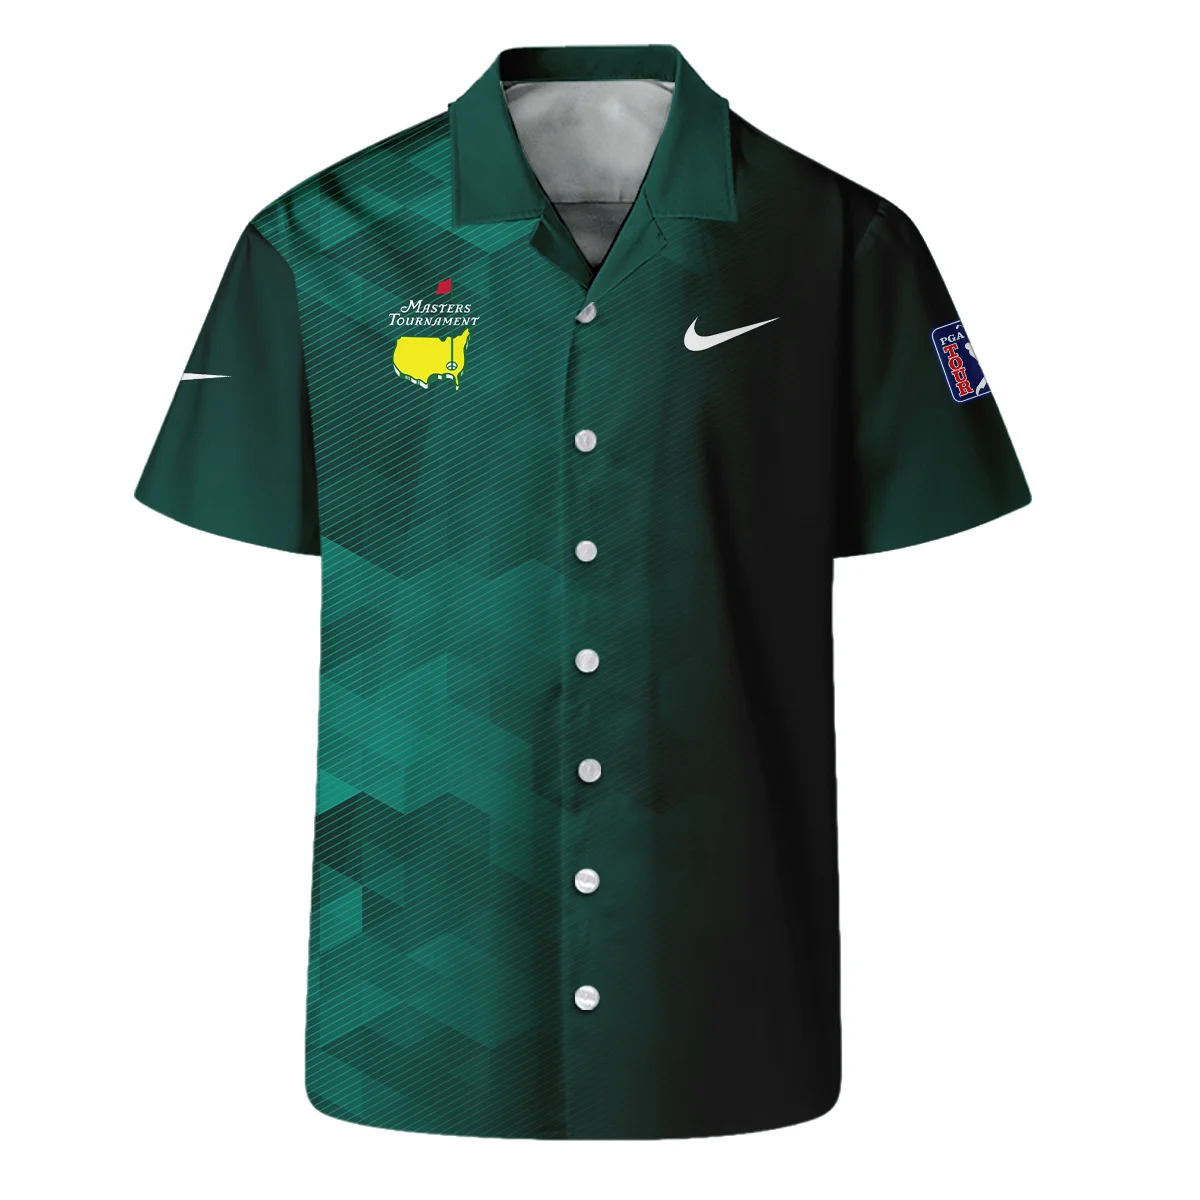 Nike Golf Sport Dark Green Gradient Abstract Background Masters Tournament Long Polo Shirt Style Classic Long Polo Shirt For Men